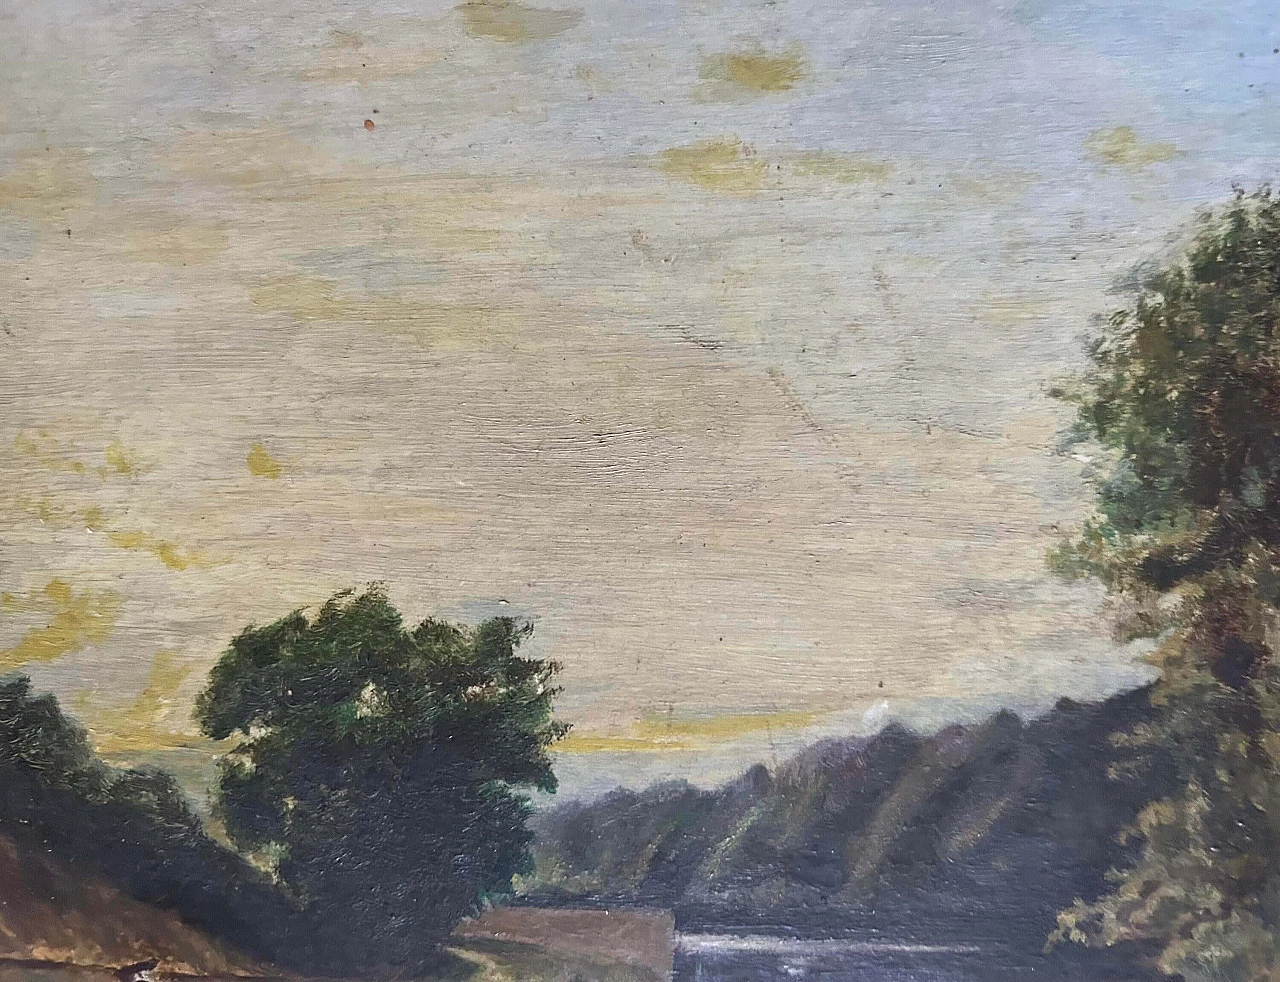 Lake landscape in the style of the Barbizon School, painting, 1920s 9